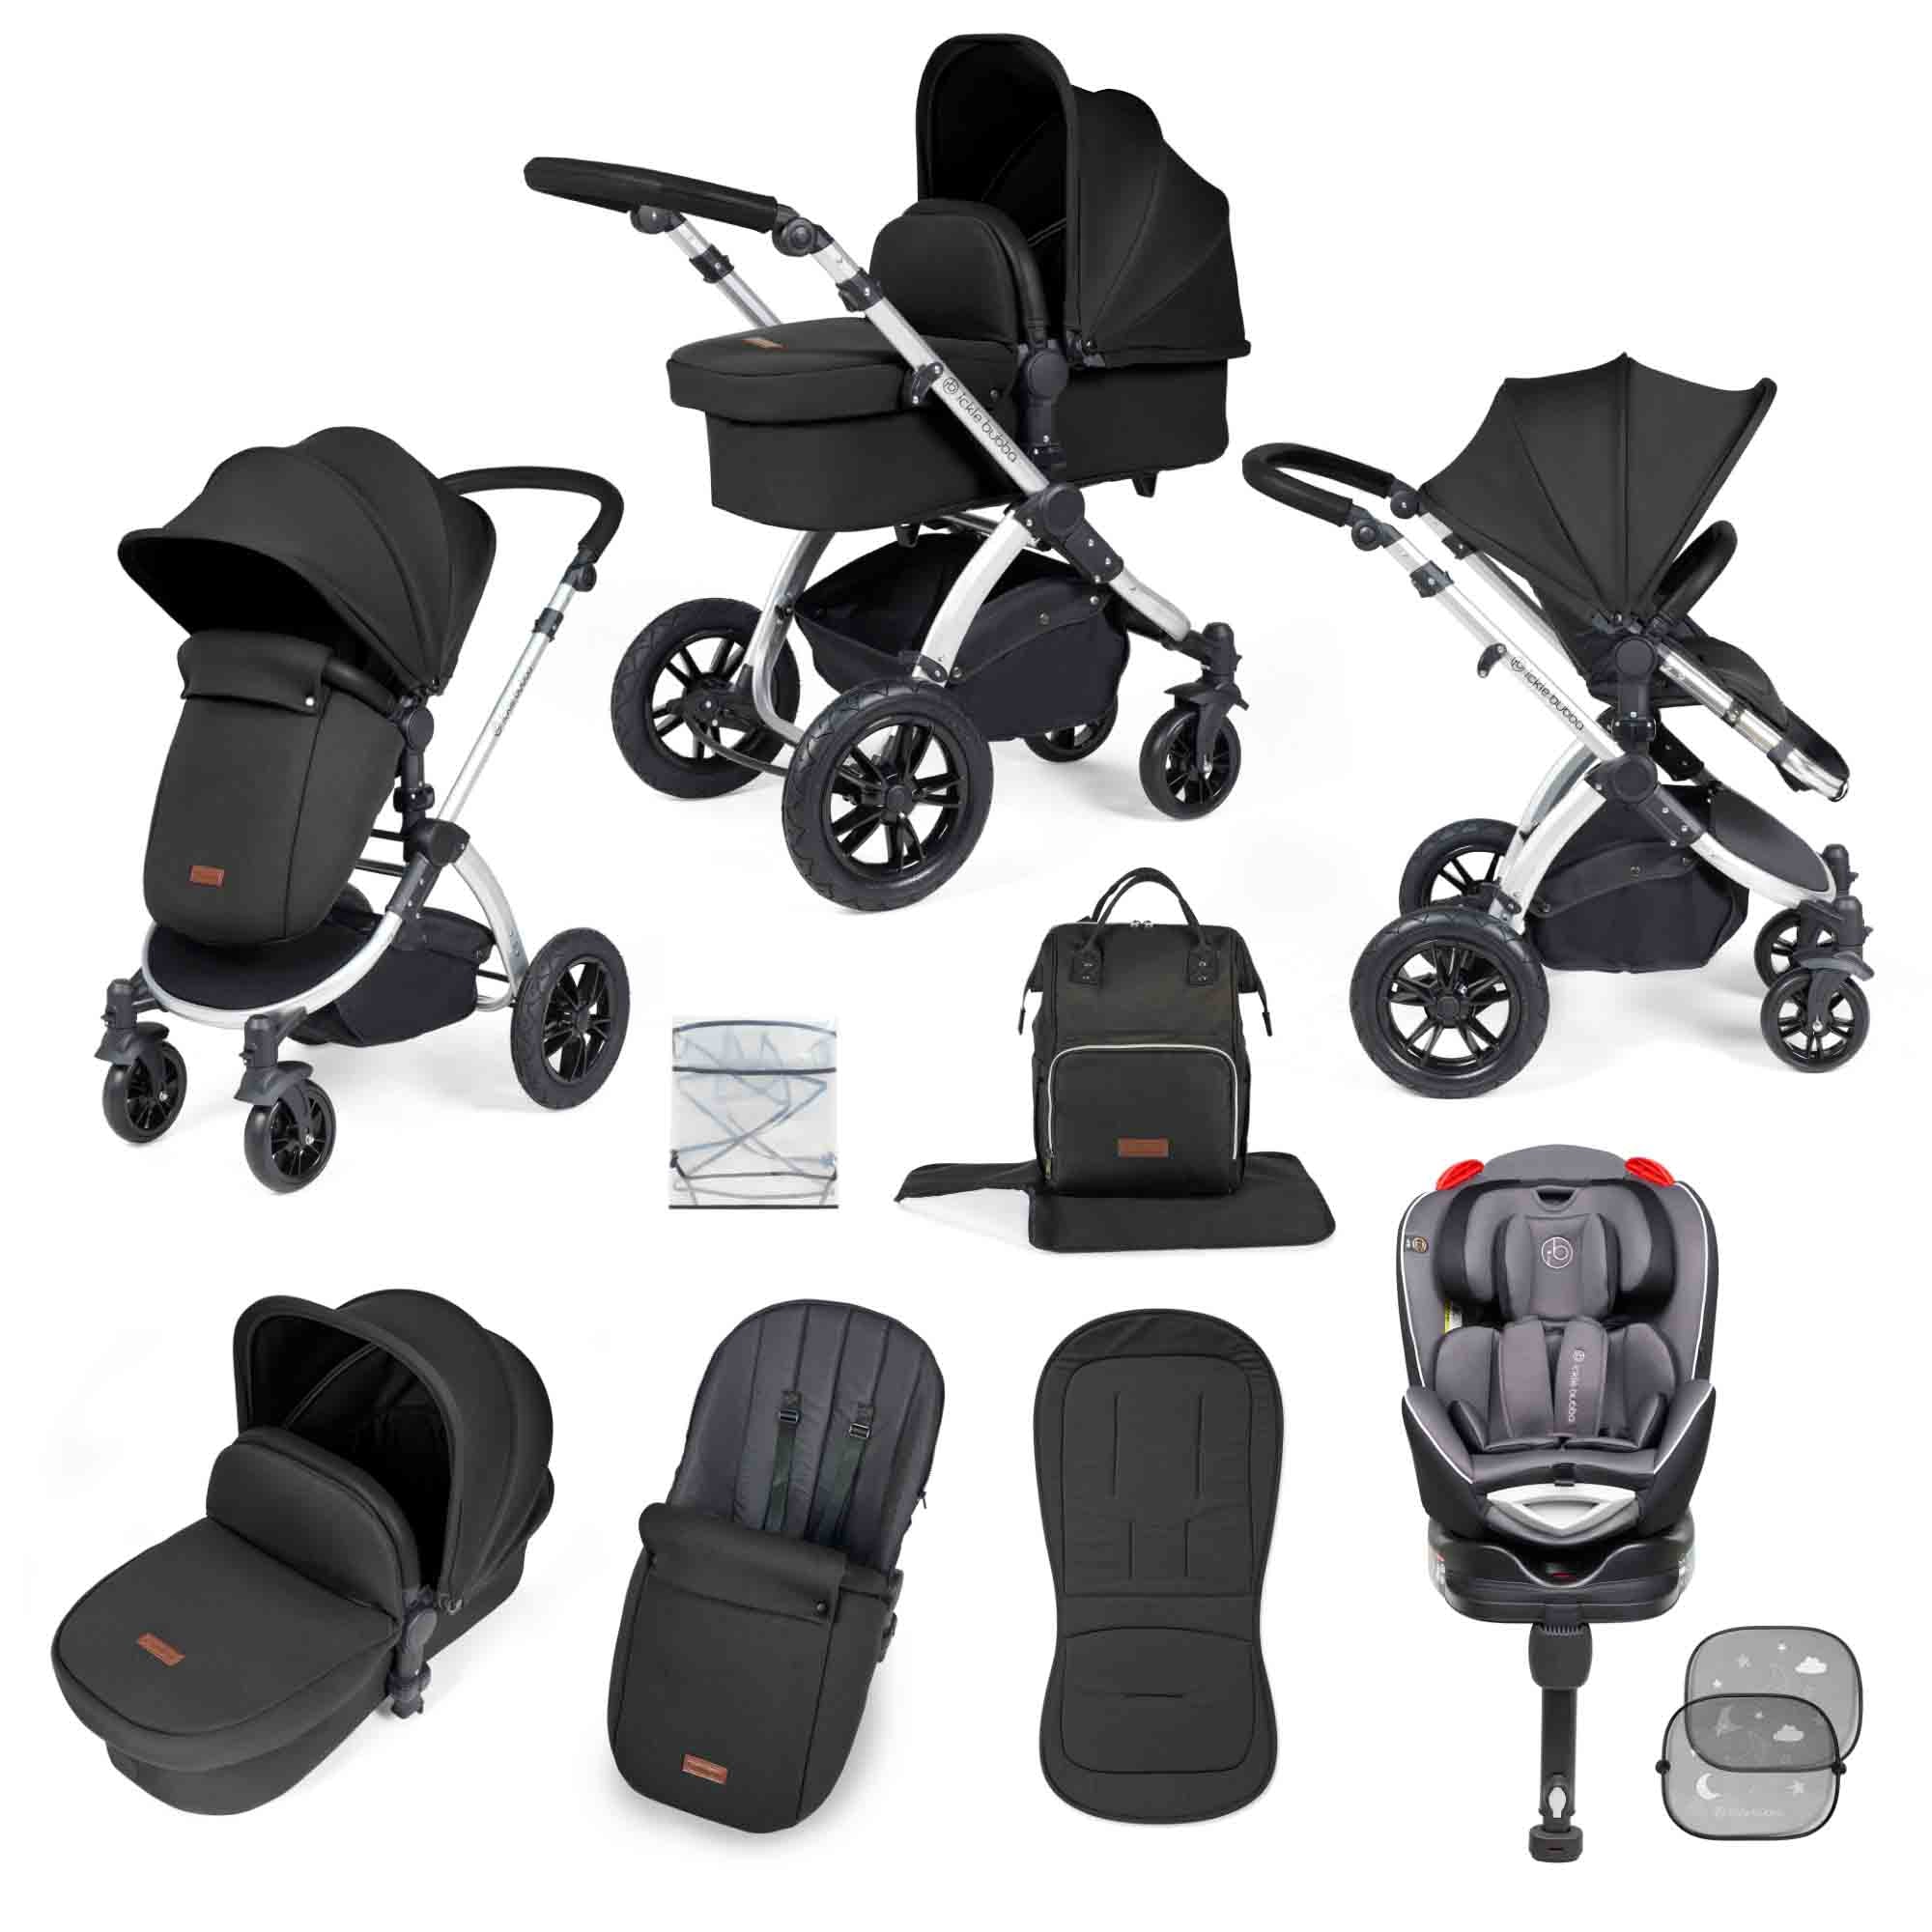 Stomp Luxe Pushchair & Rotating Group 0+/1/2 ISOFIX Car Seat